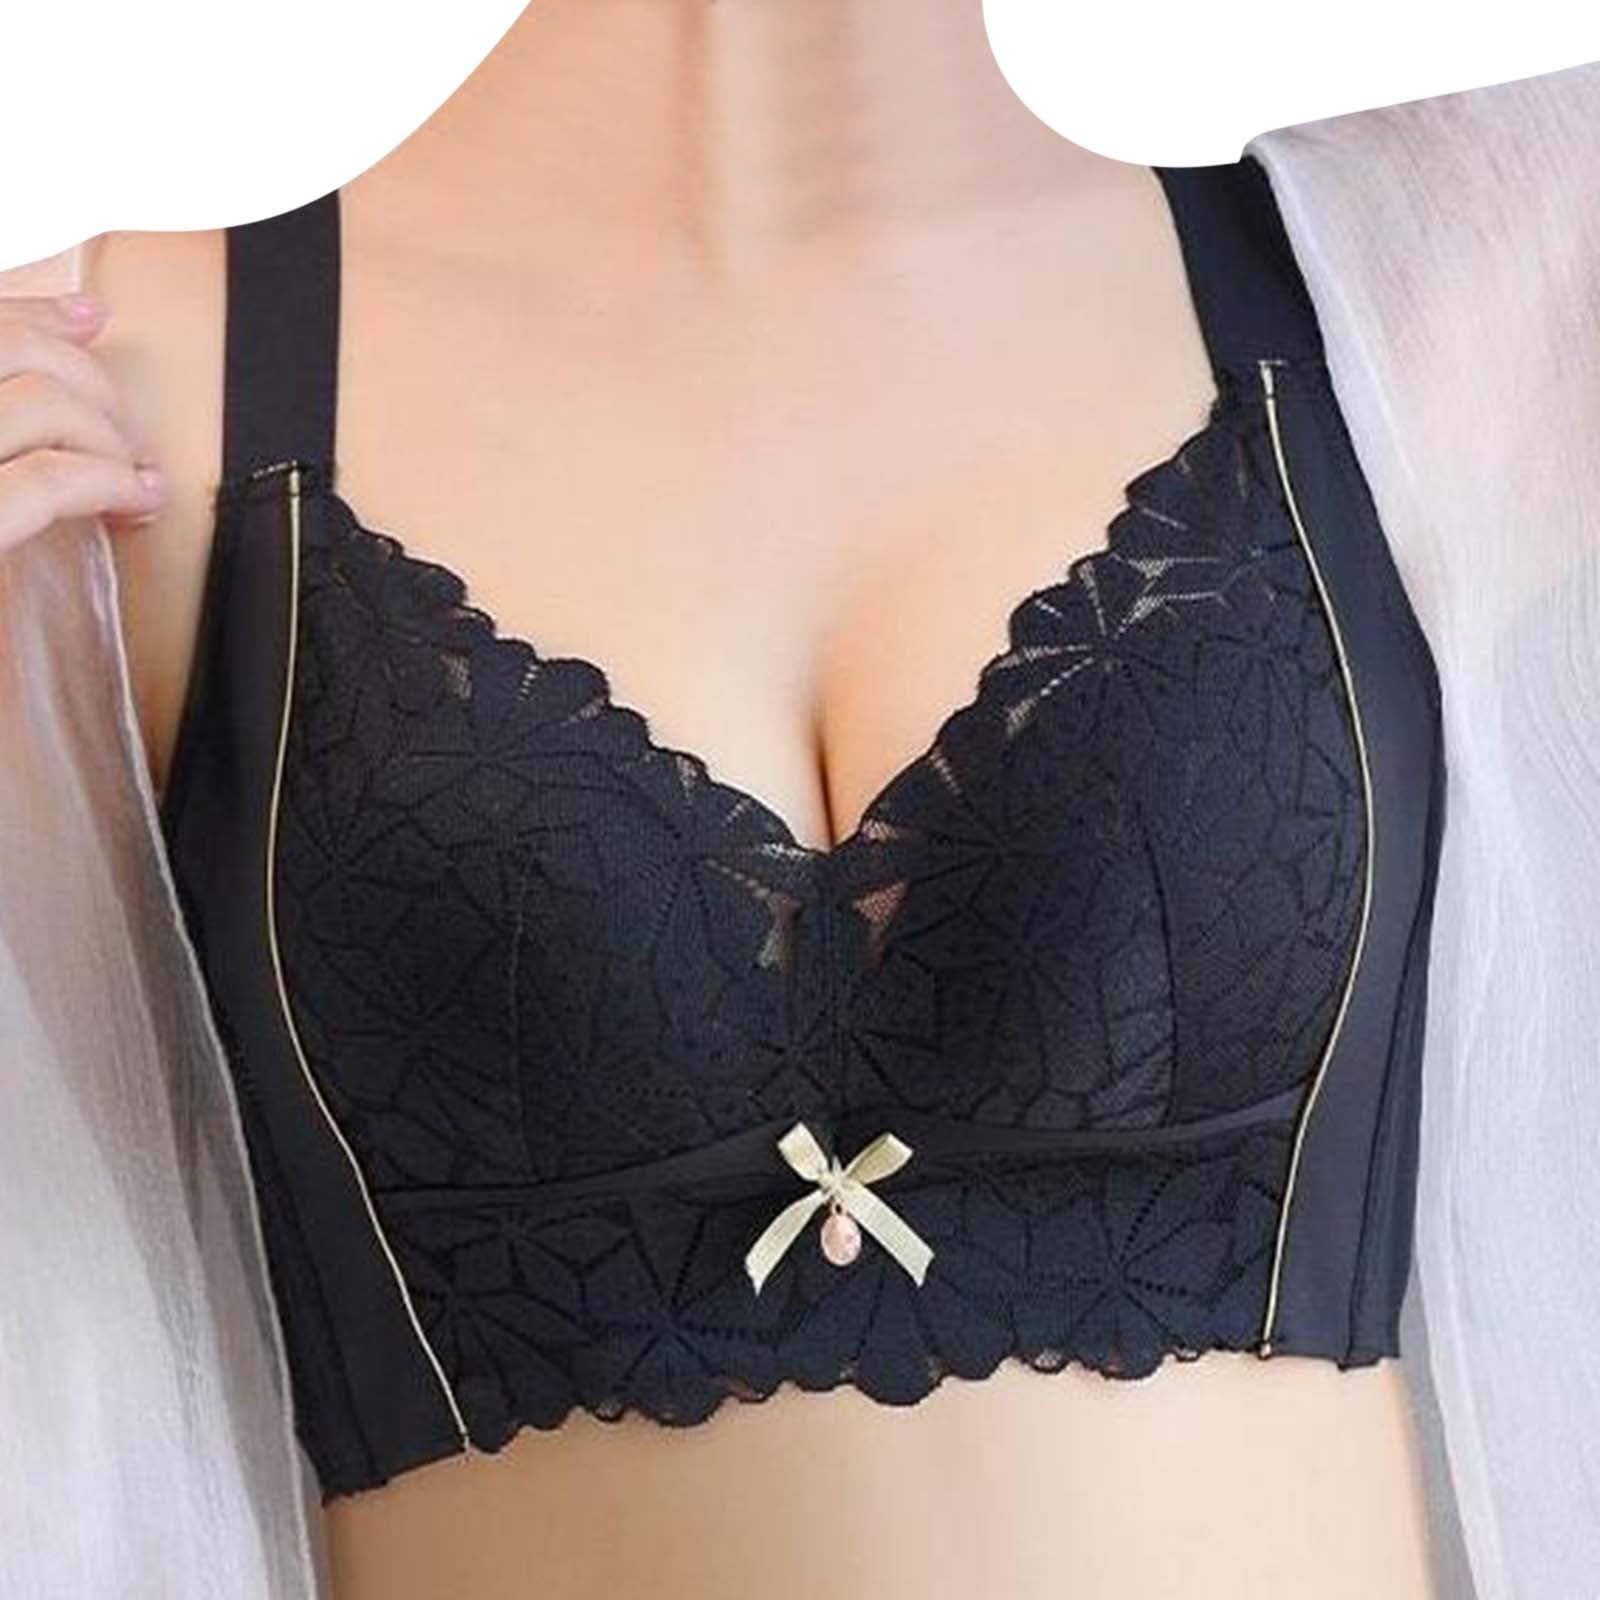 Shop Generic Gather Bra Female E Cup Fancy Underwire Thin Without Steel  Ring Plus Size 32d Bra Lace Sexy Push Up Bralette Sensual Lingerie Online